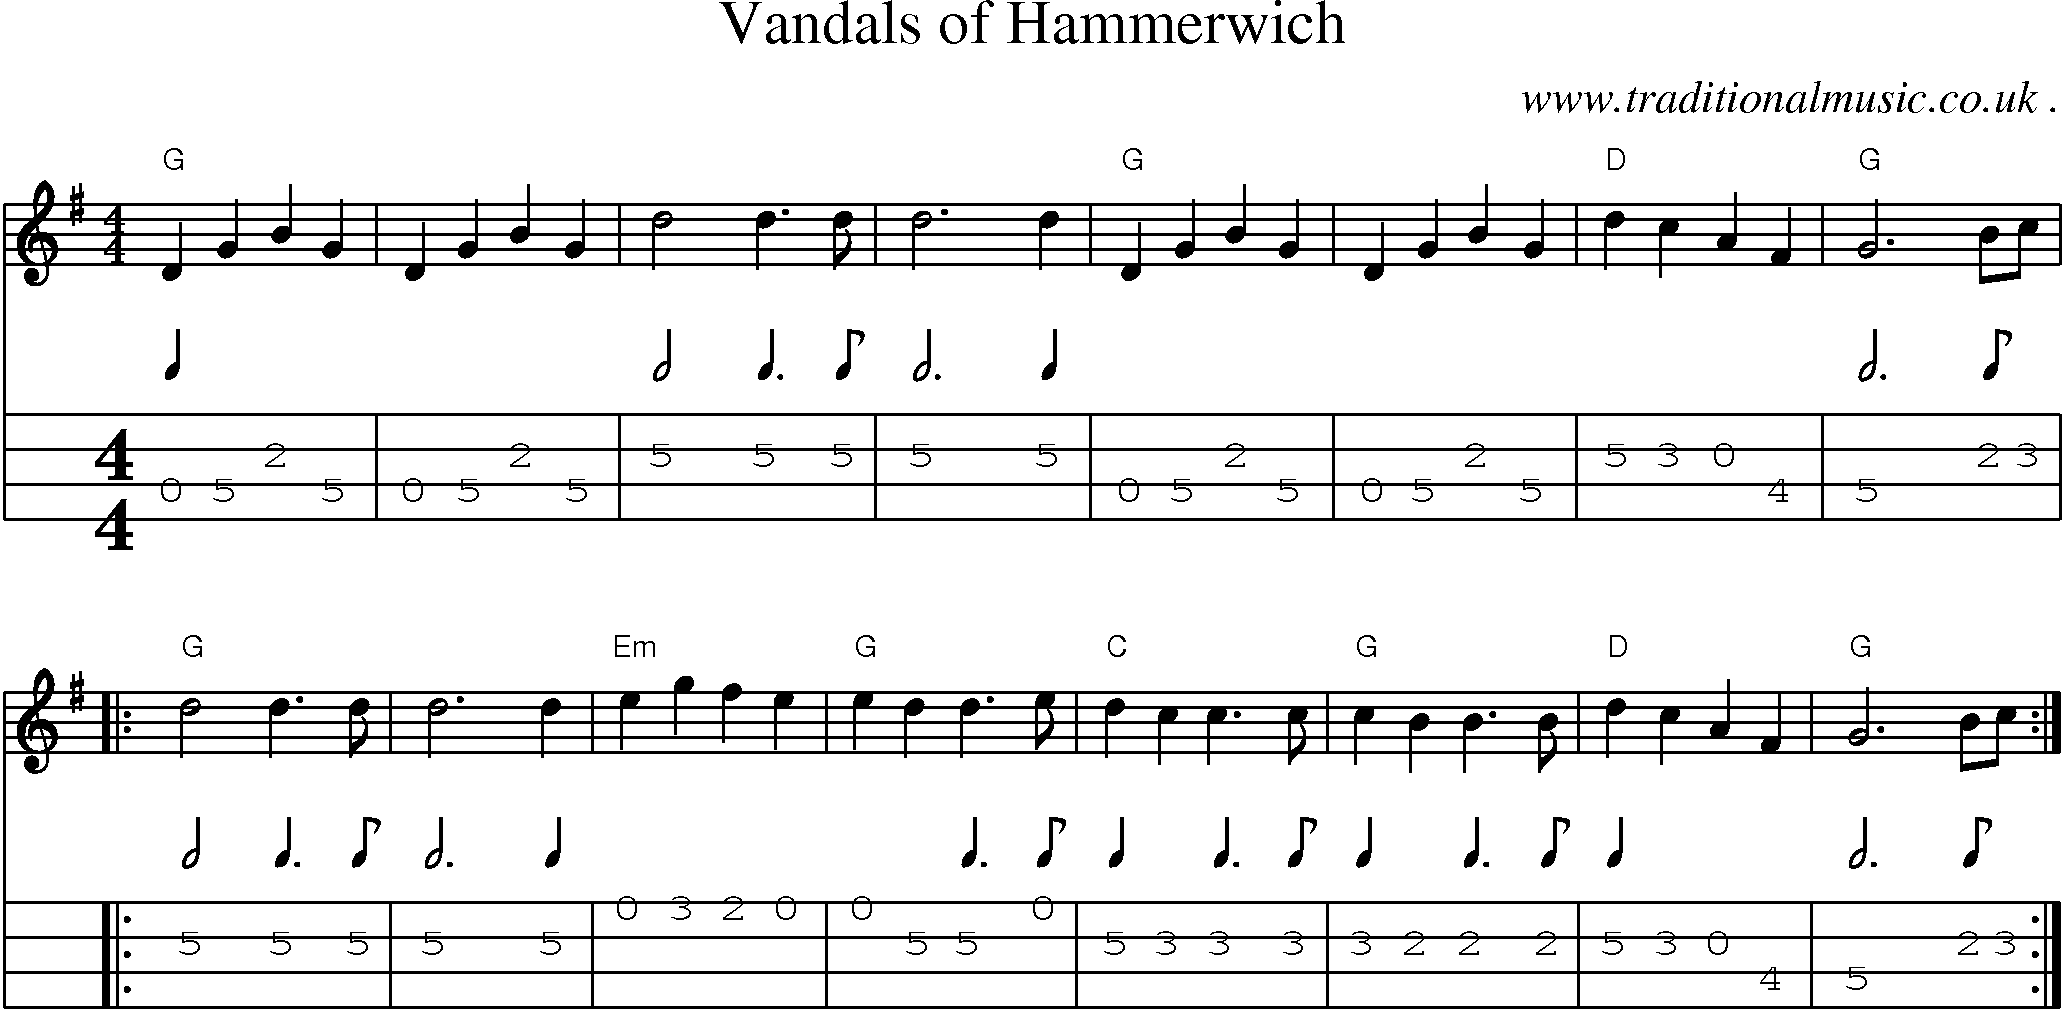 Music Score and Guitar Tabs for Vandals of Hammerwich